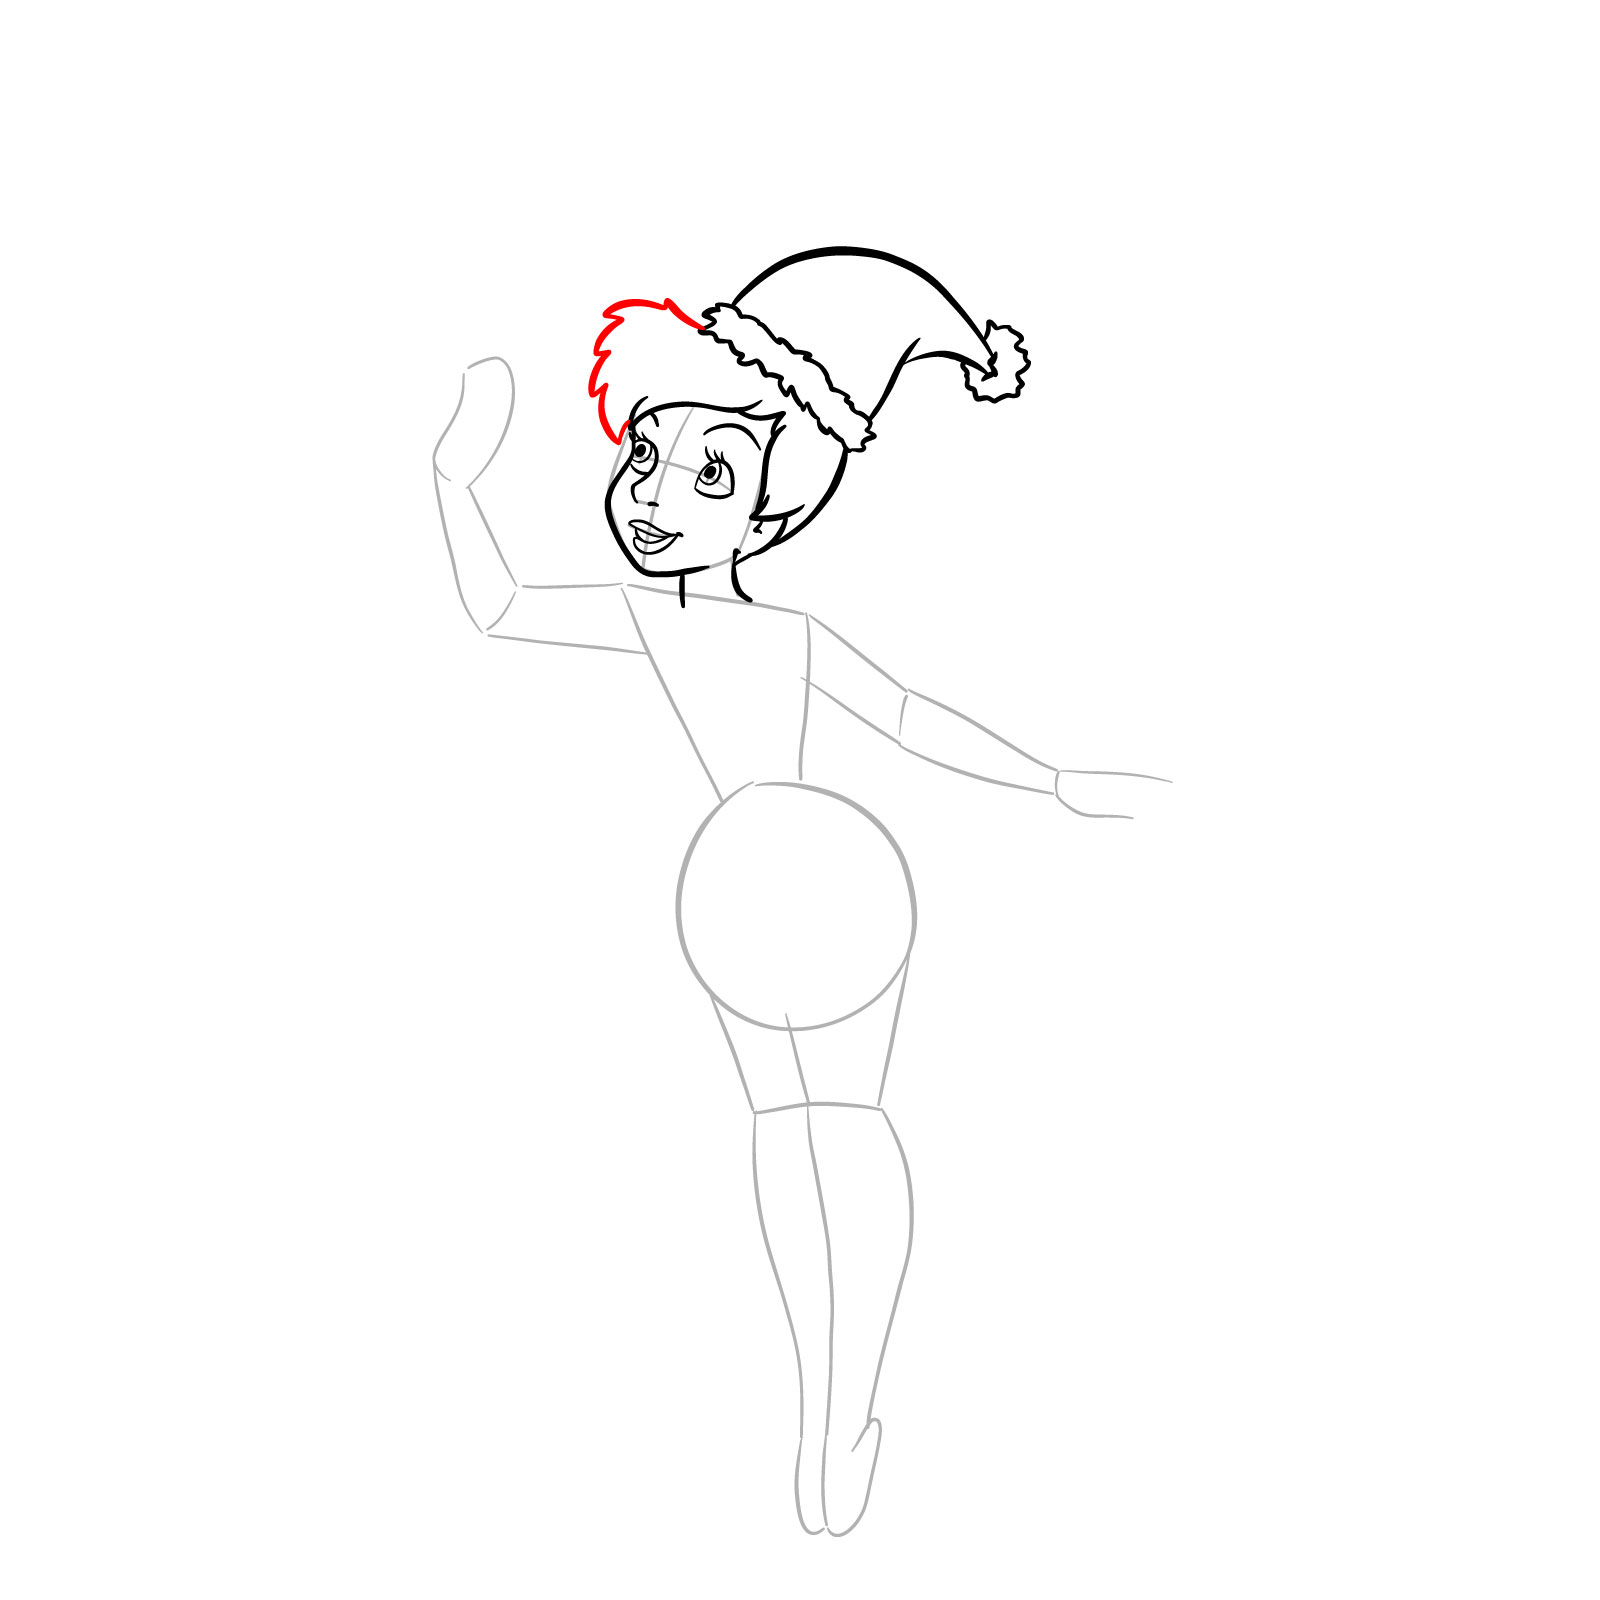 How to draw Tinker Bell in a Christmas costume - step 13